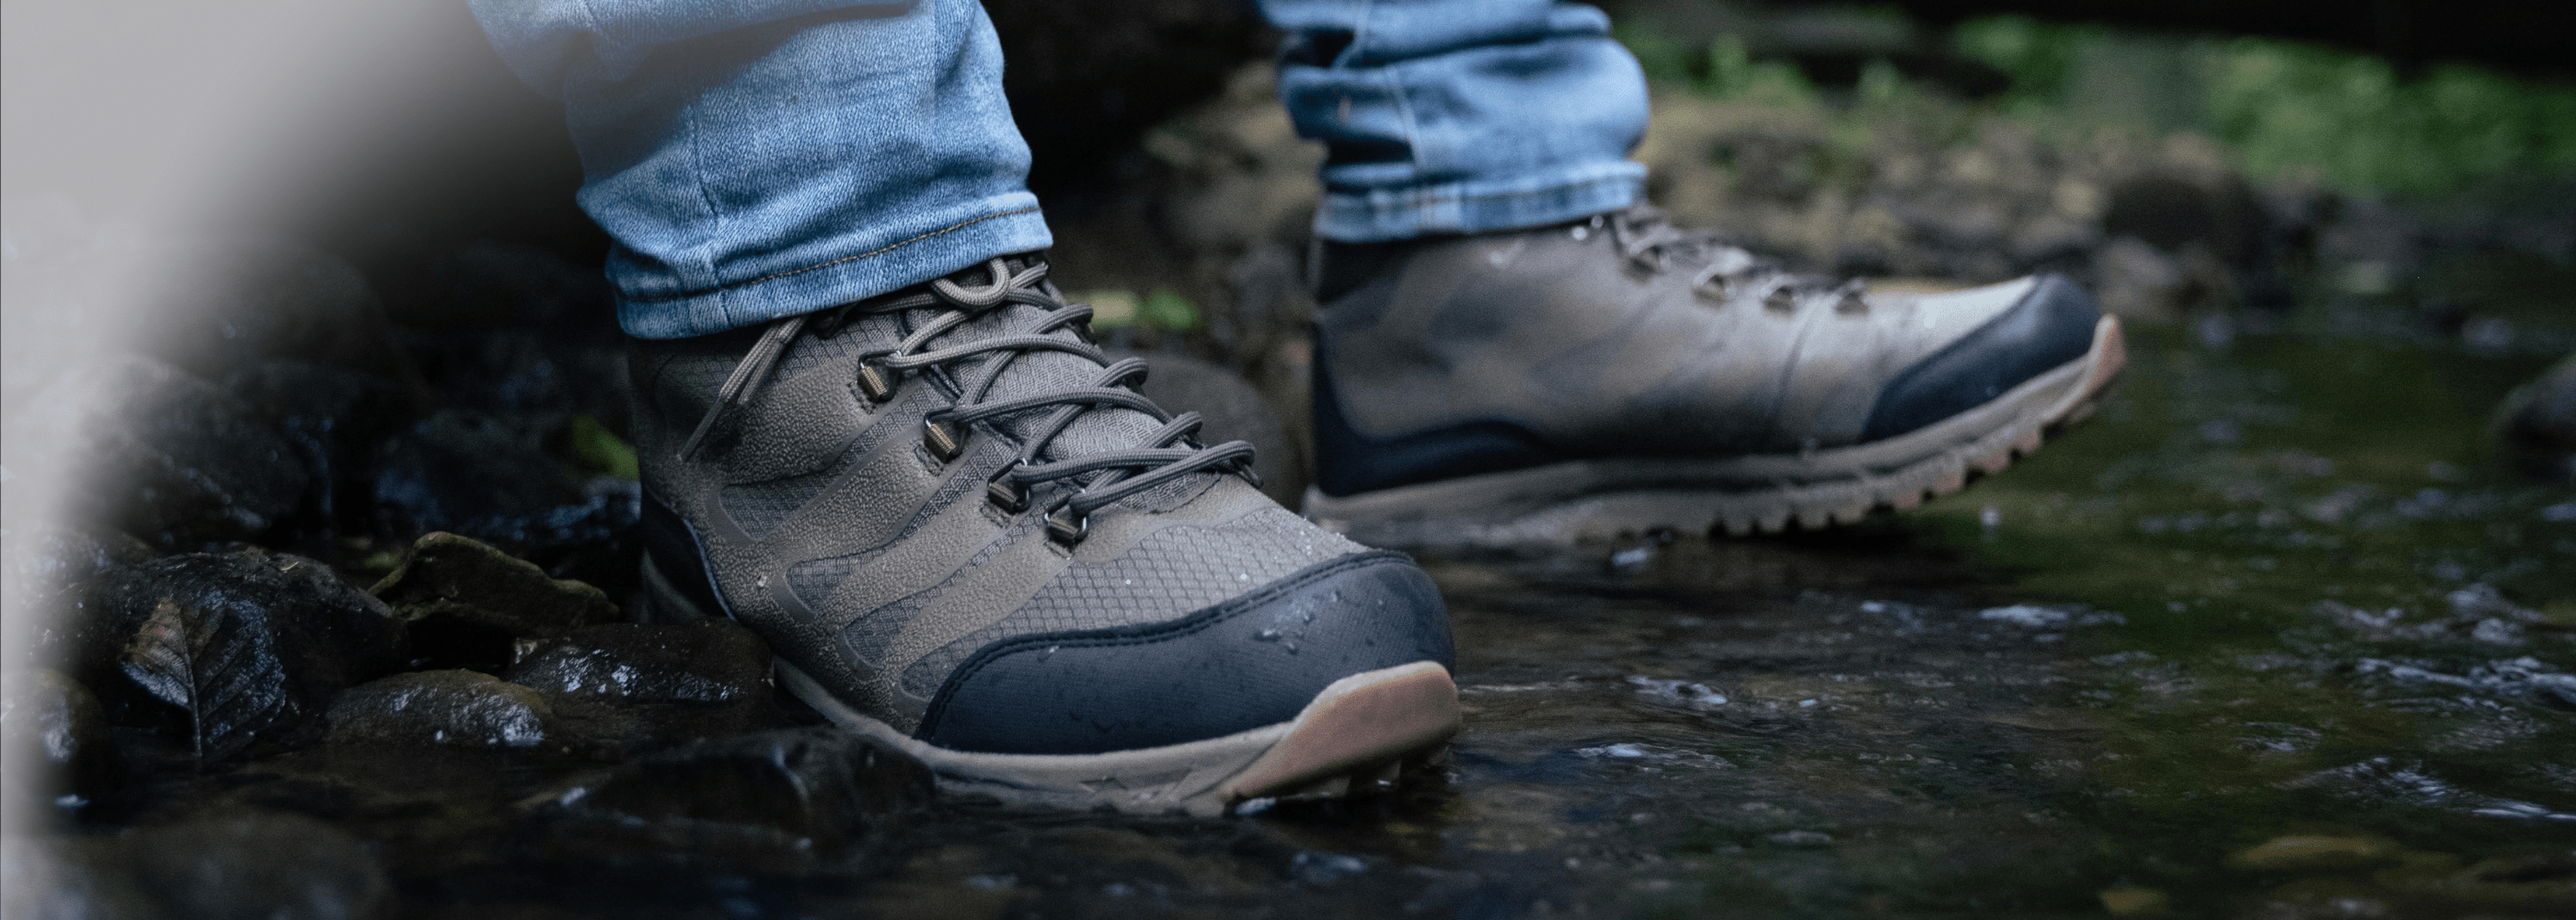 hiking boots for men in the water of a river to show they are waterproof